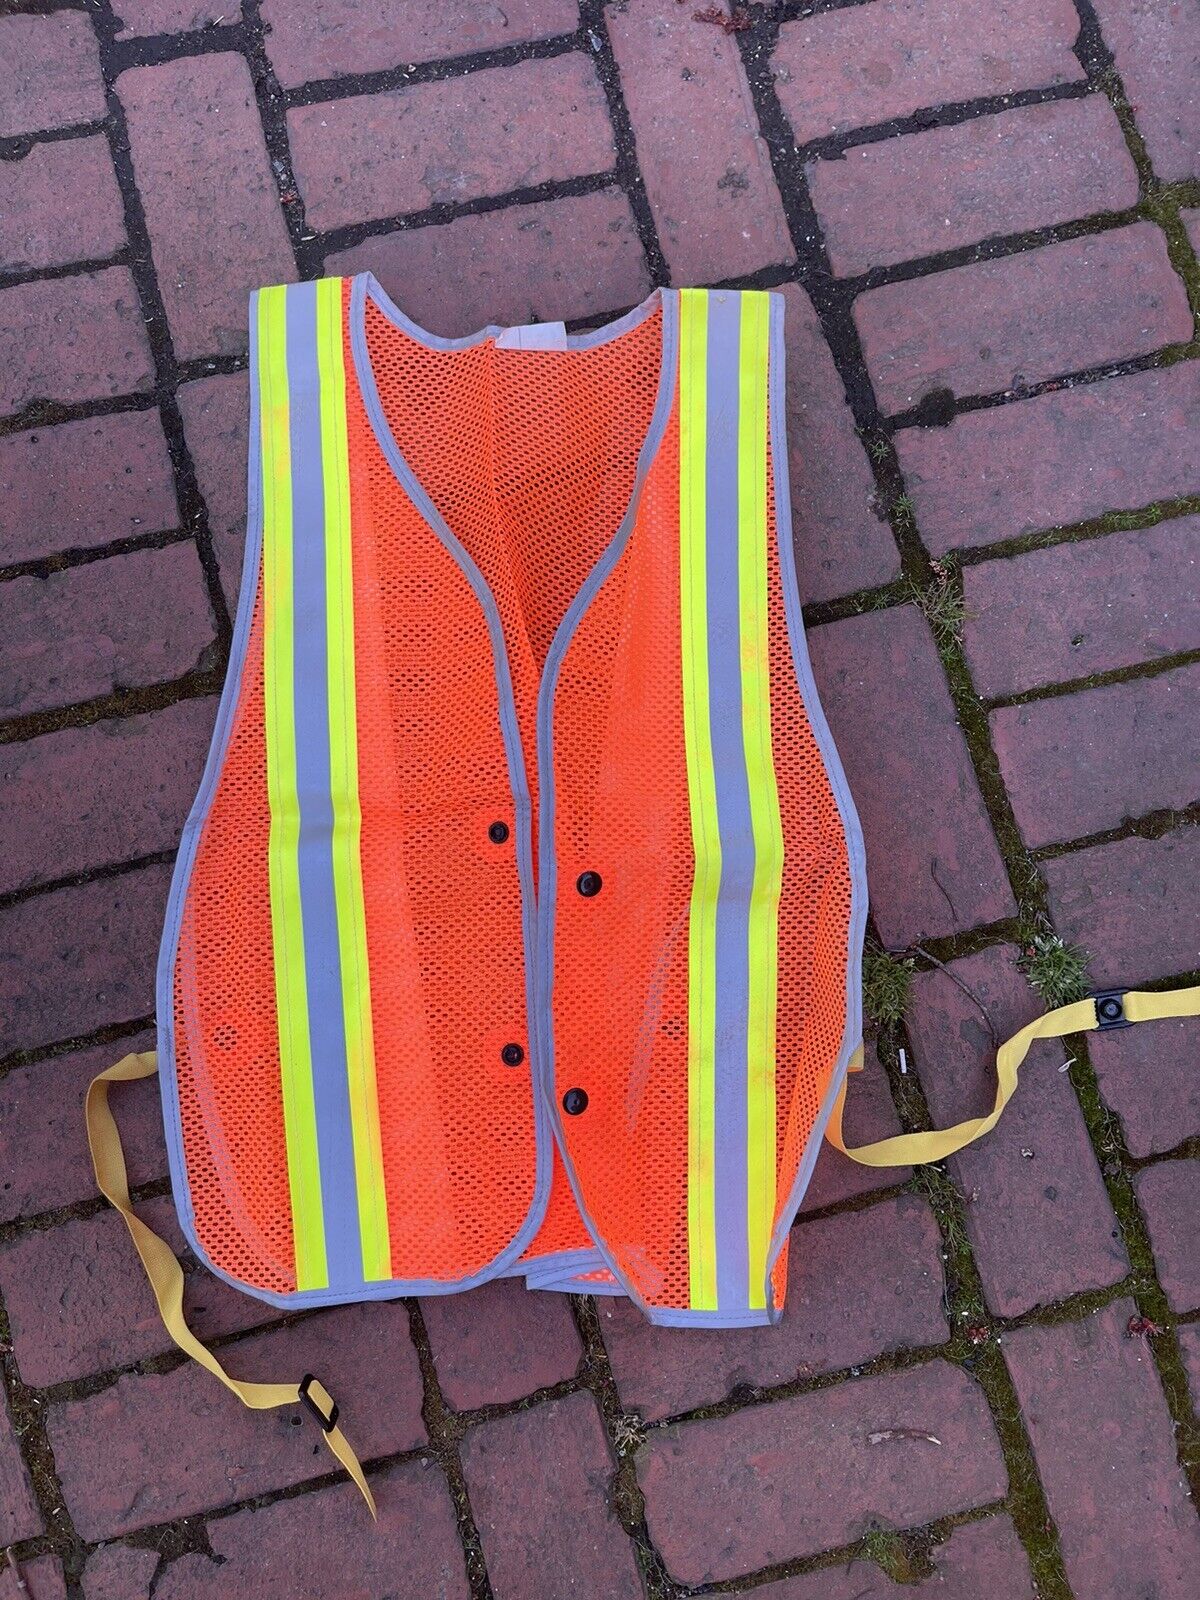 MTA New York City Transit Safety Vest Subway Bus Collectible 1992 Vintage NYC